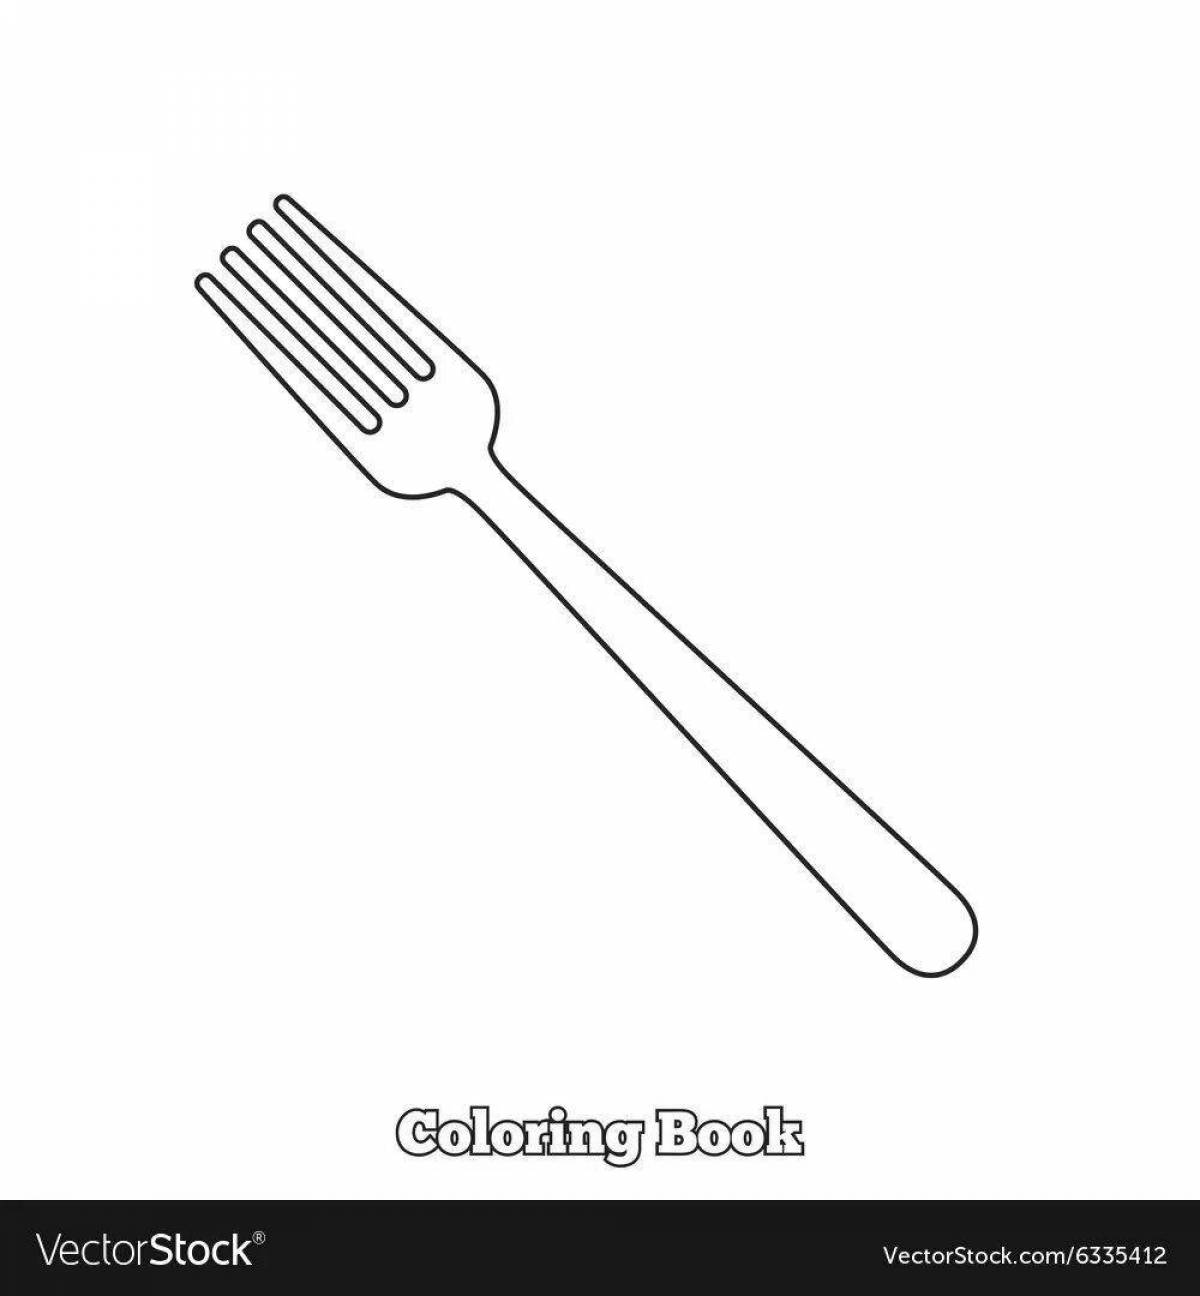 Colorful coloring fork for the little ones